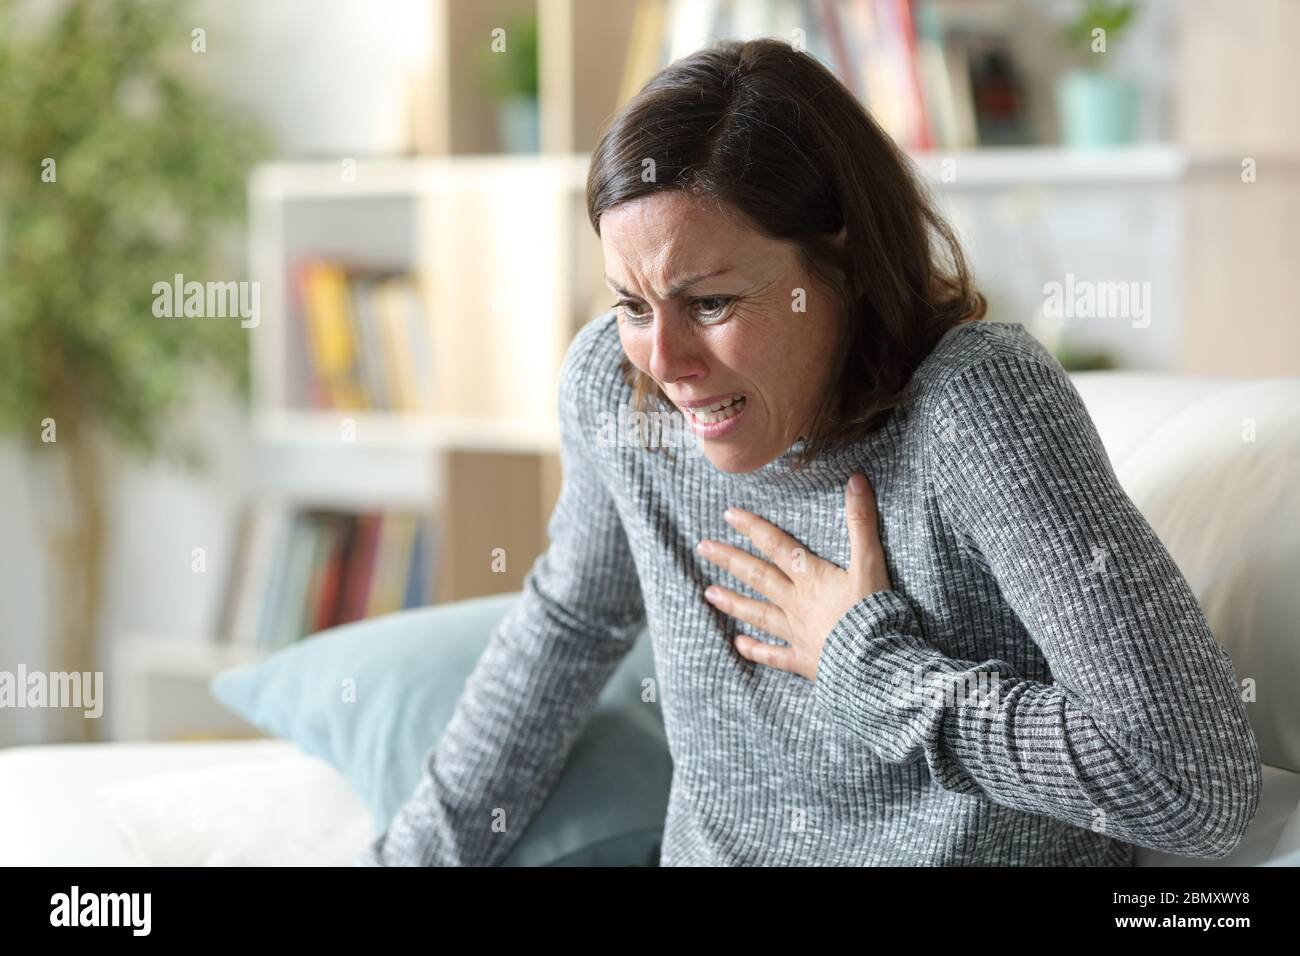 Scared adult woman suffering heart attack touching chest in pain sitting on a couch at home Stock Photo